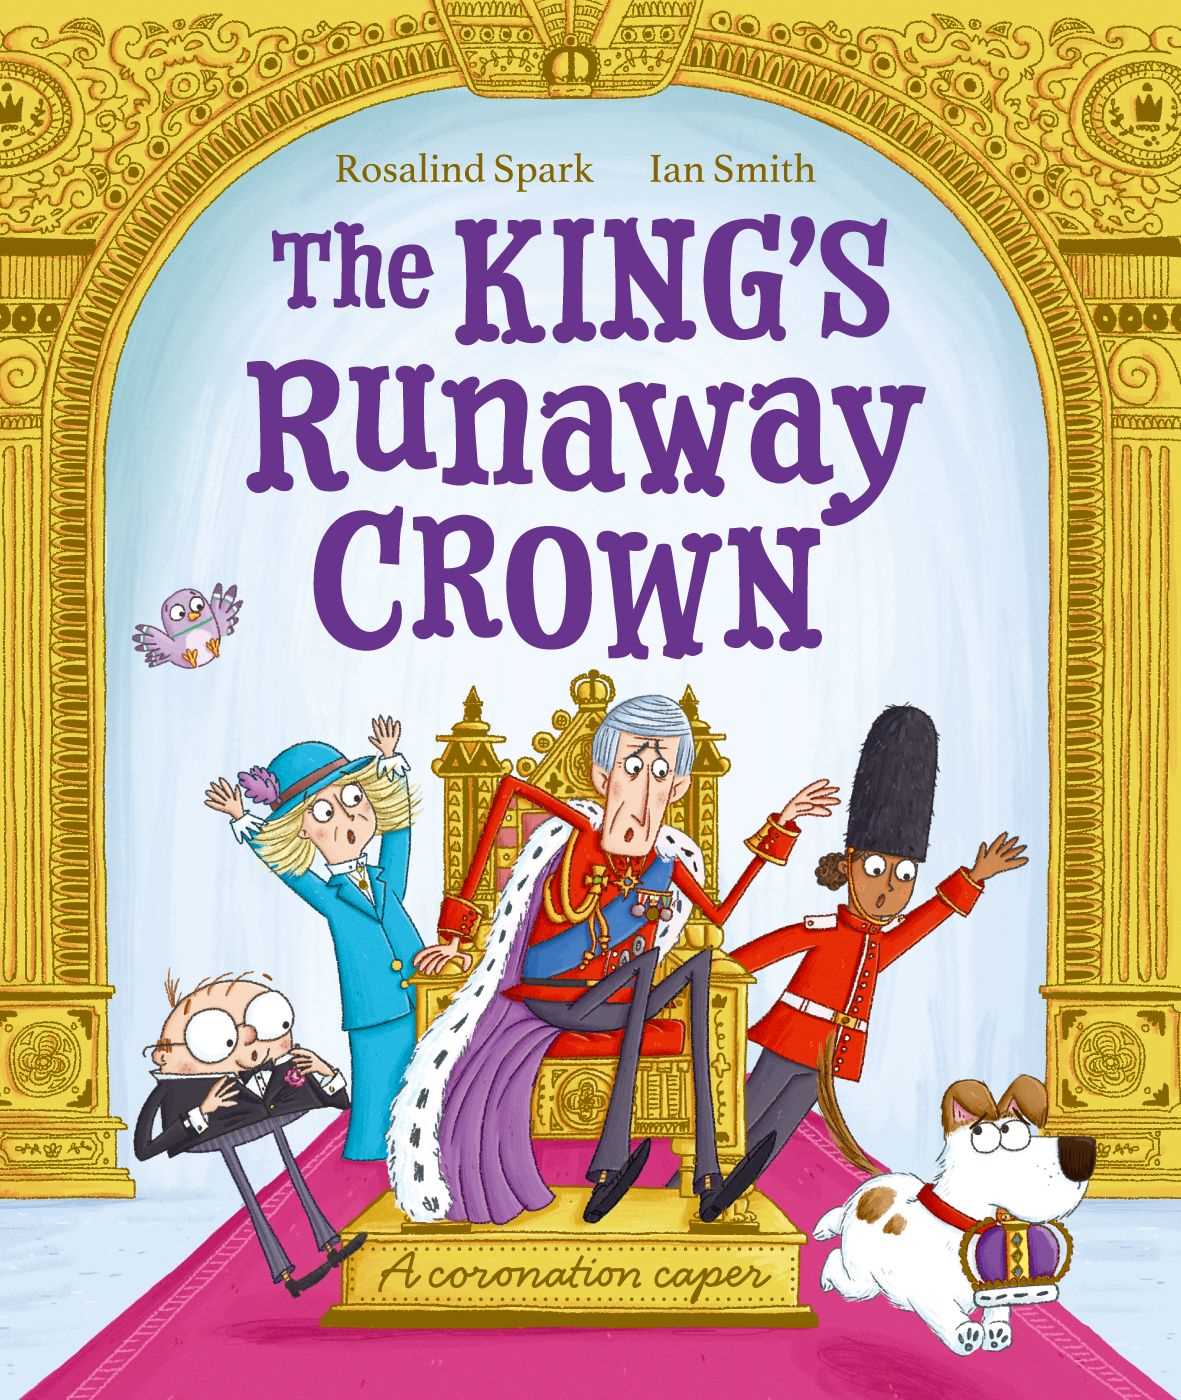 The King’s Runaway Crown (Very Short Introductions for Curious Young Minds)